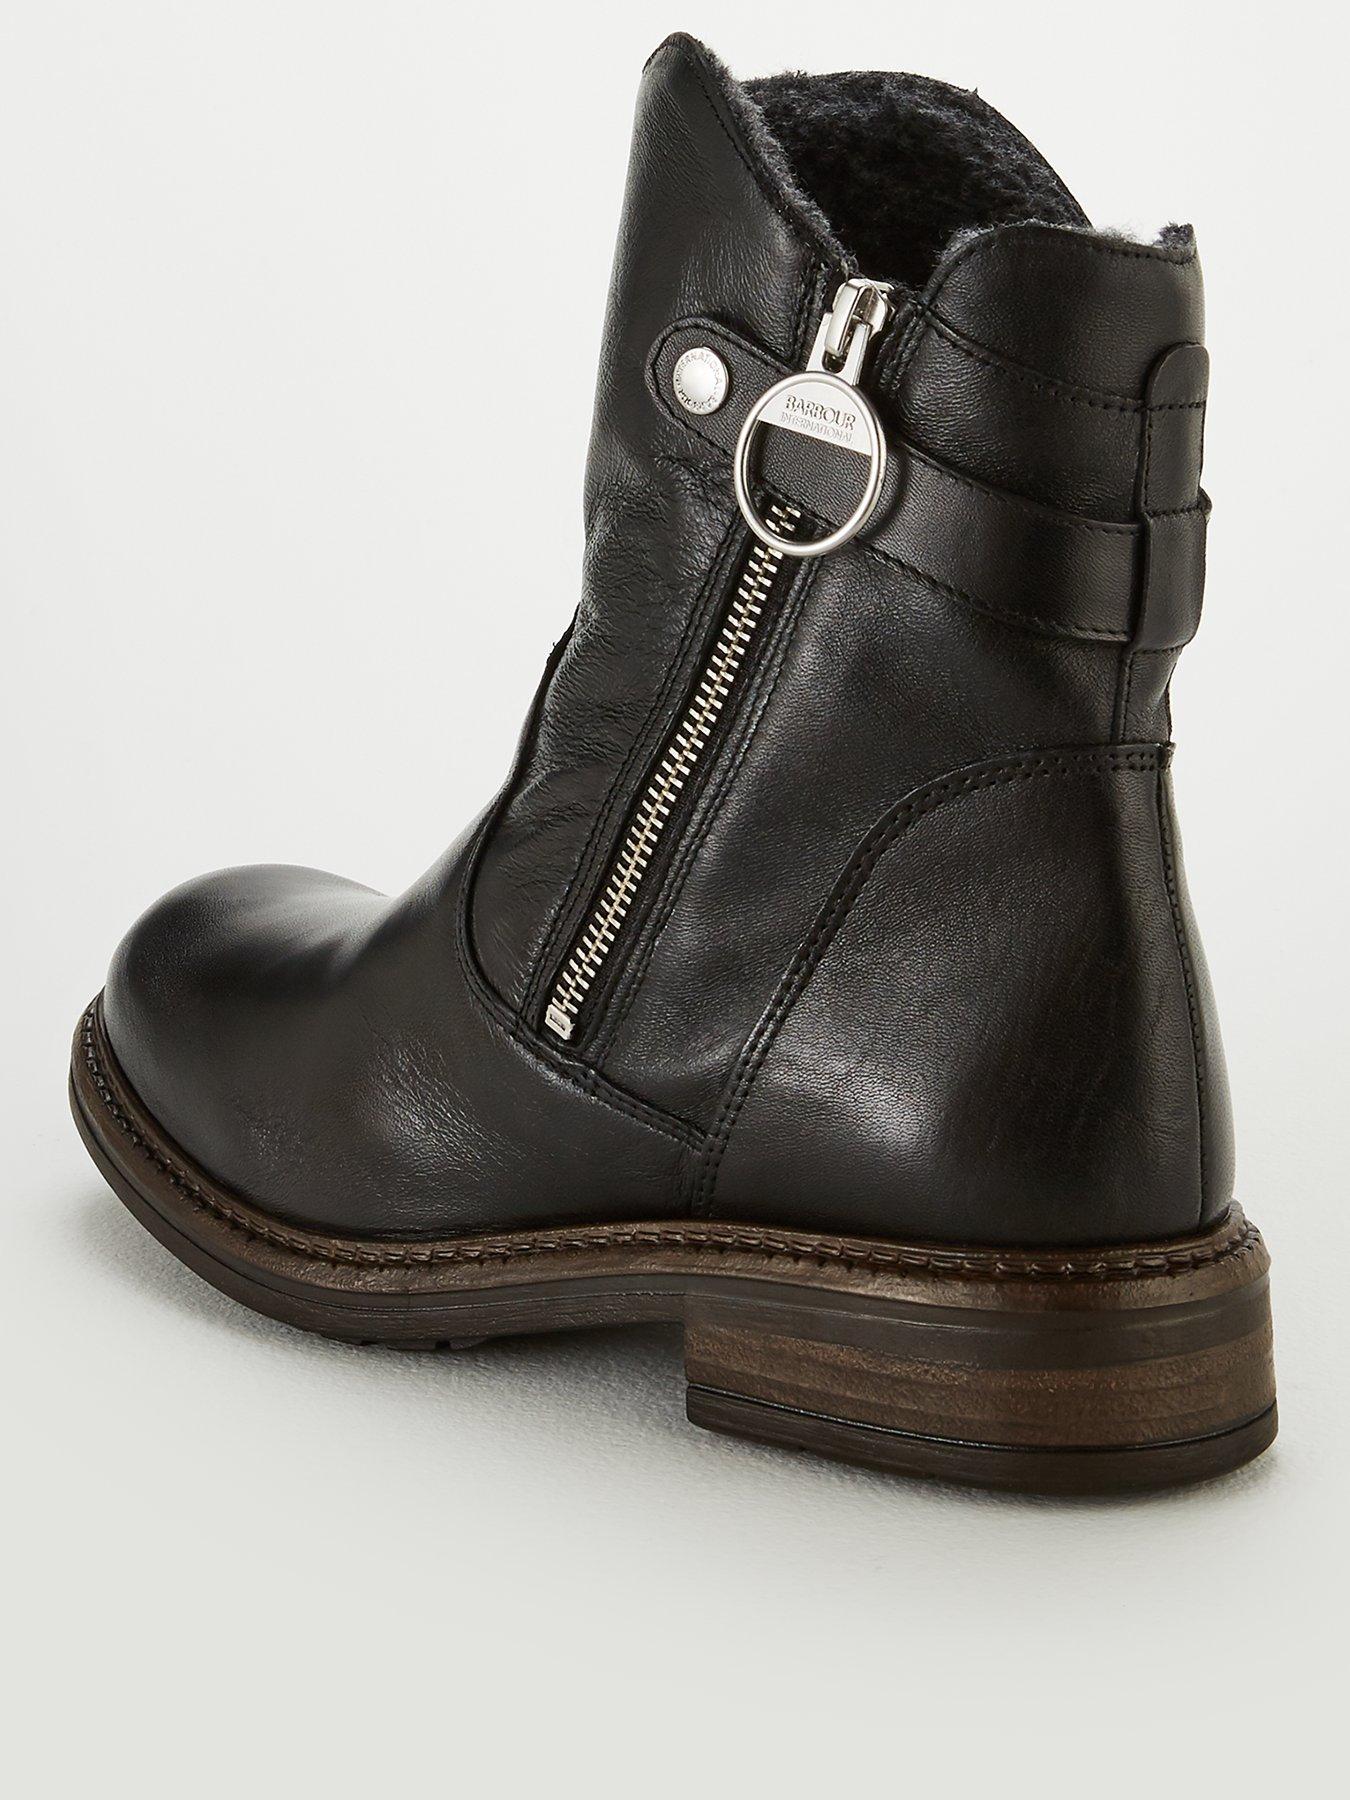 barbour costello boots